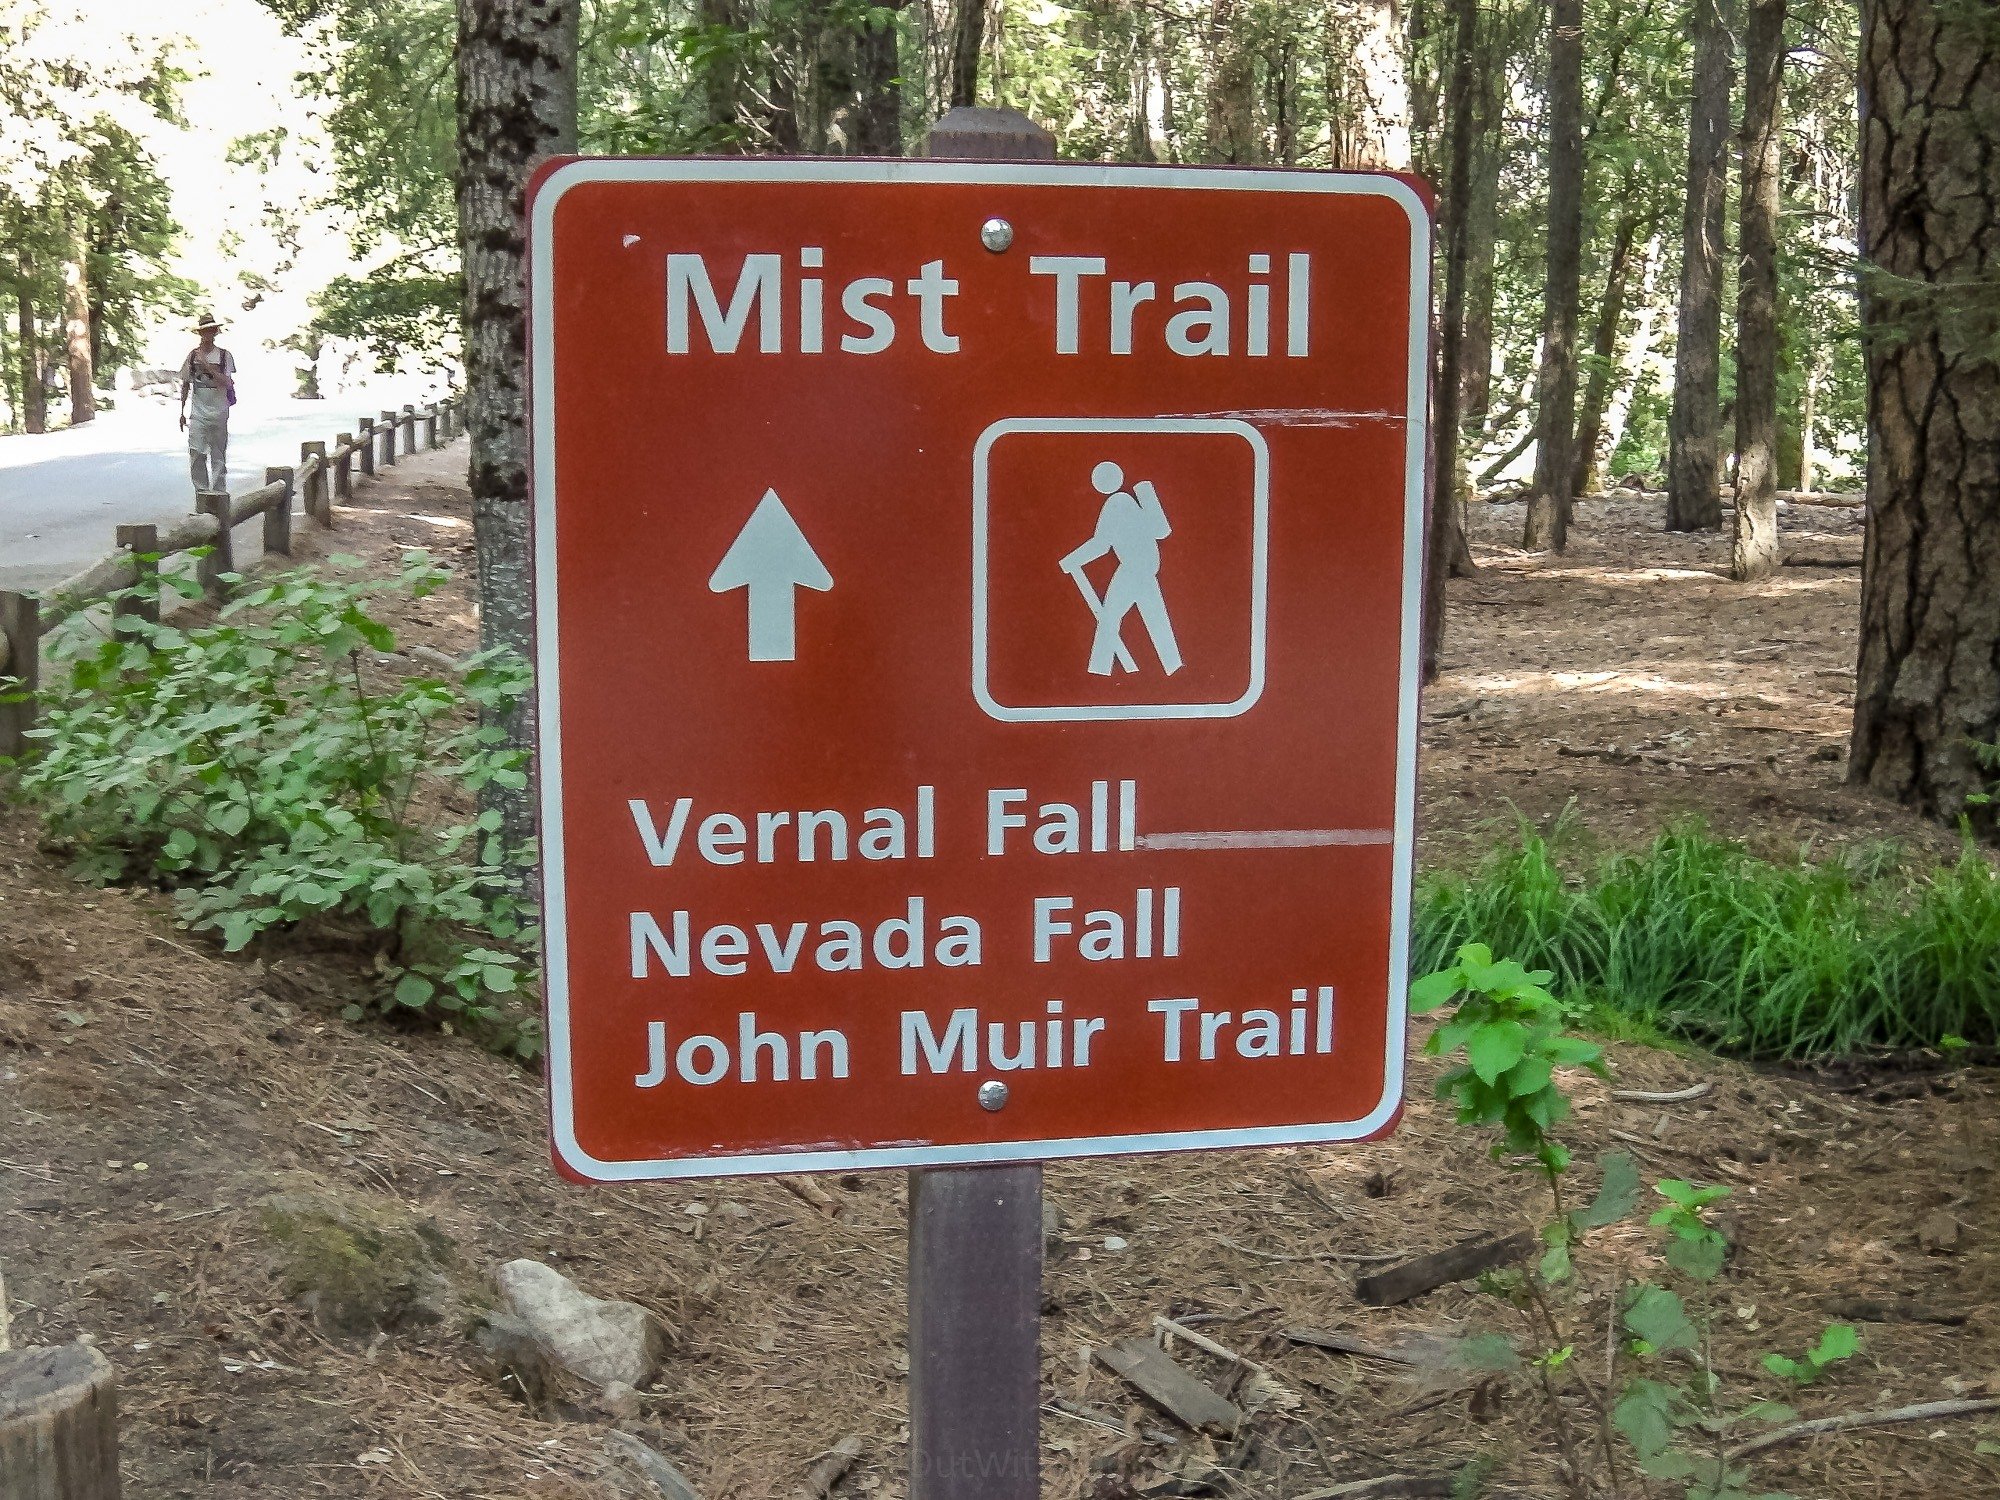 The Mist Trail from Yosemite Valley